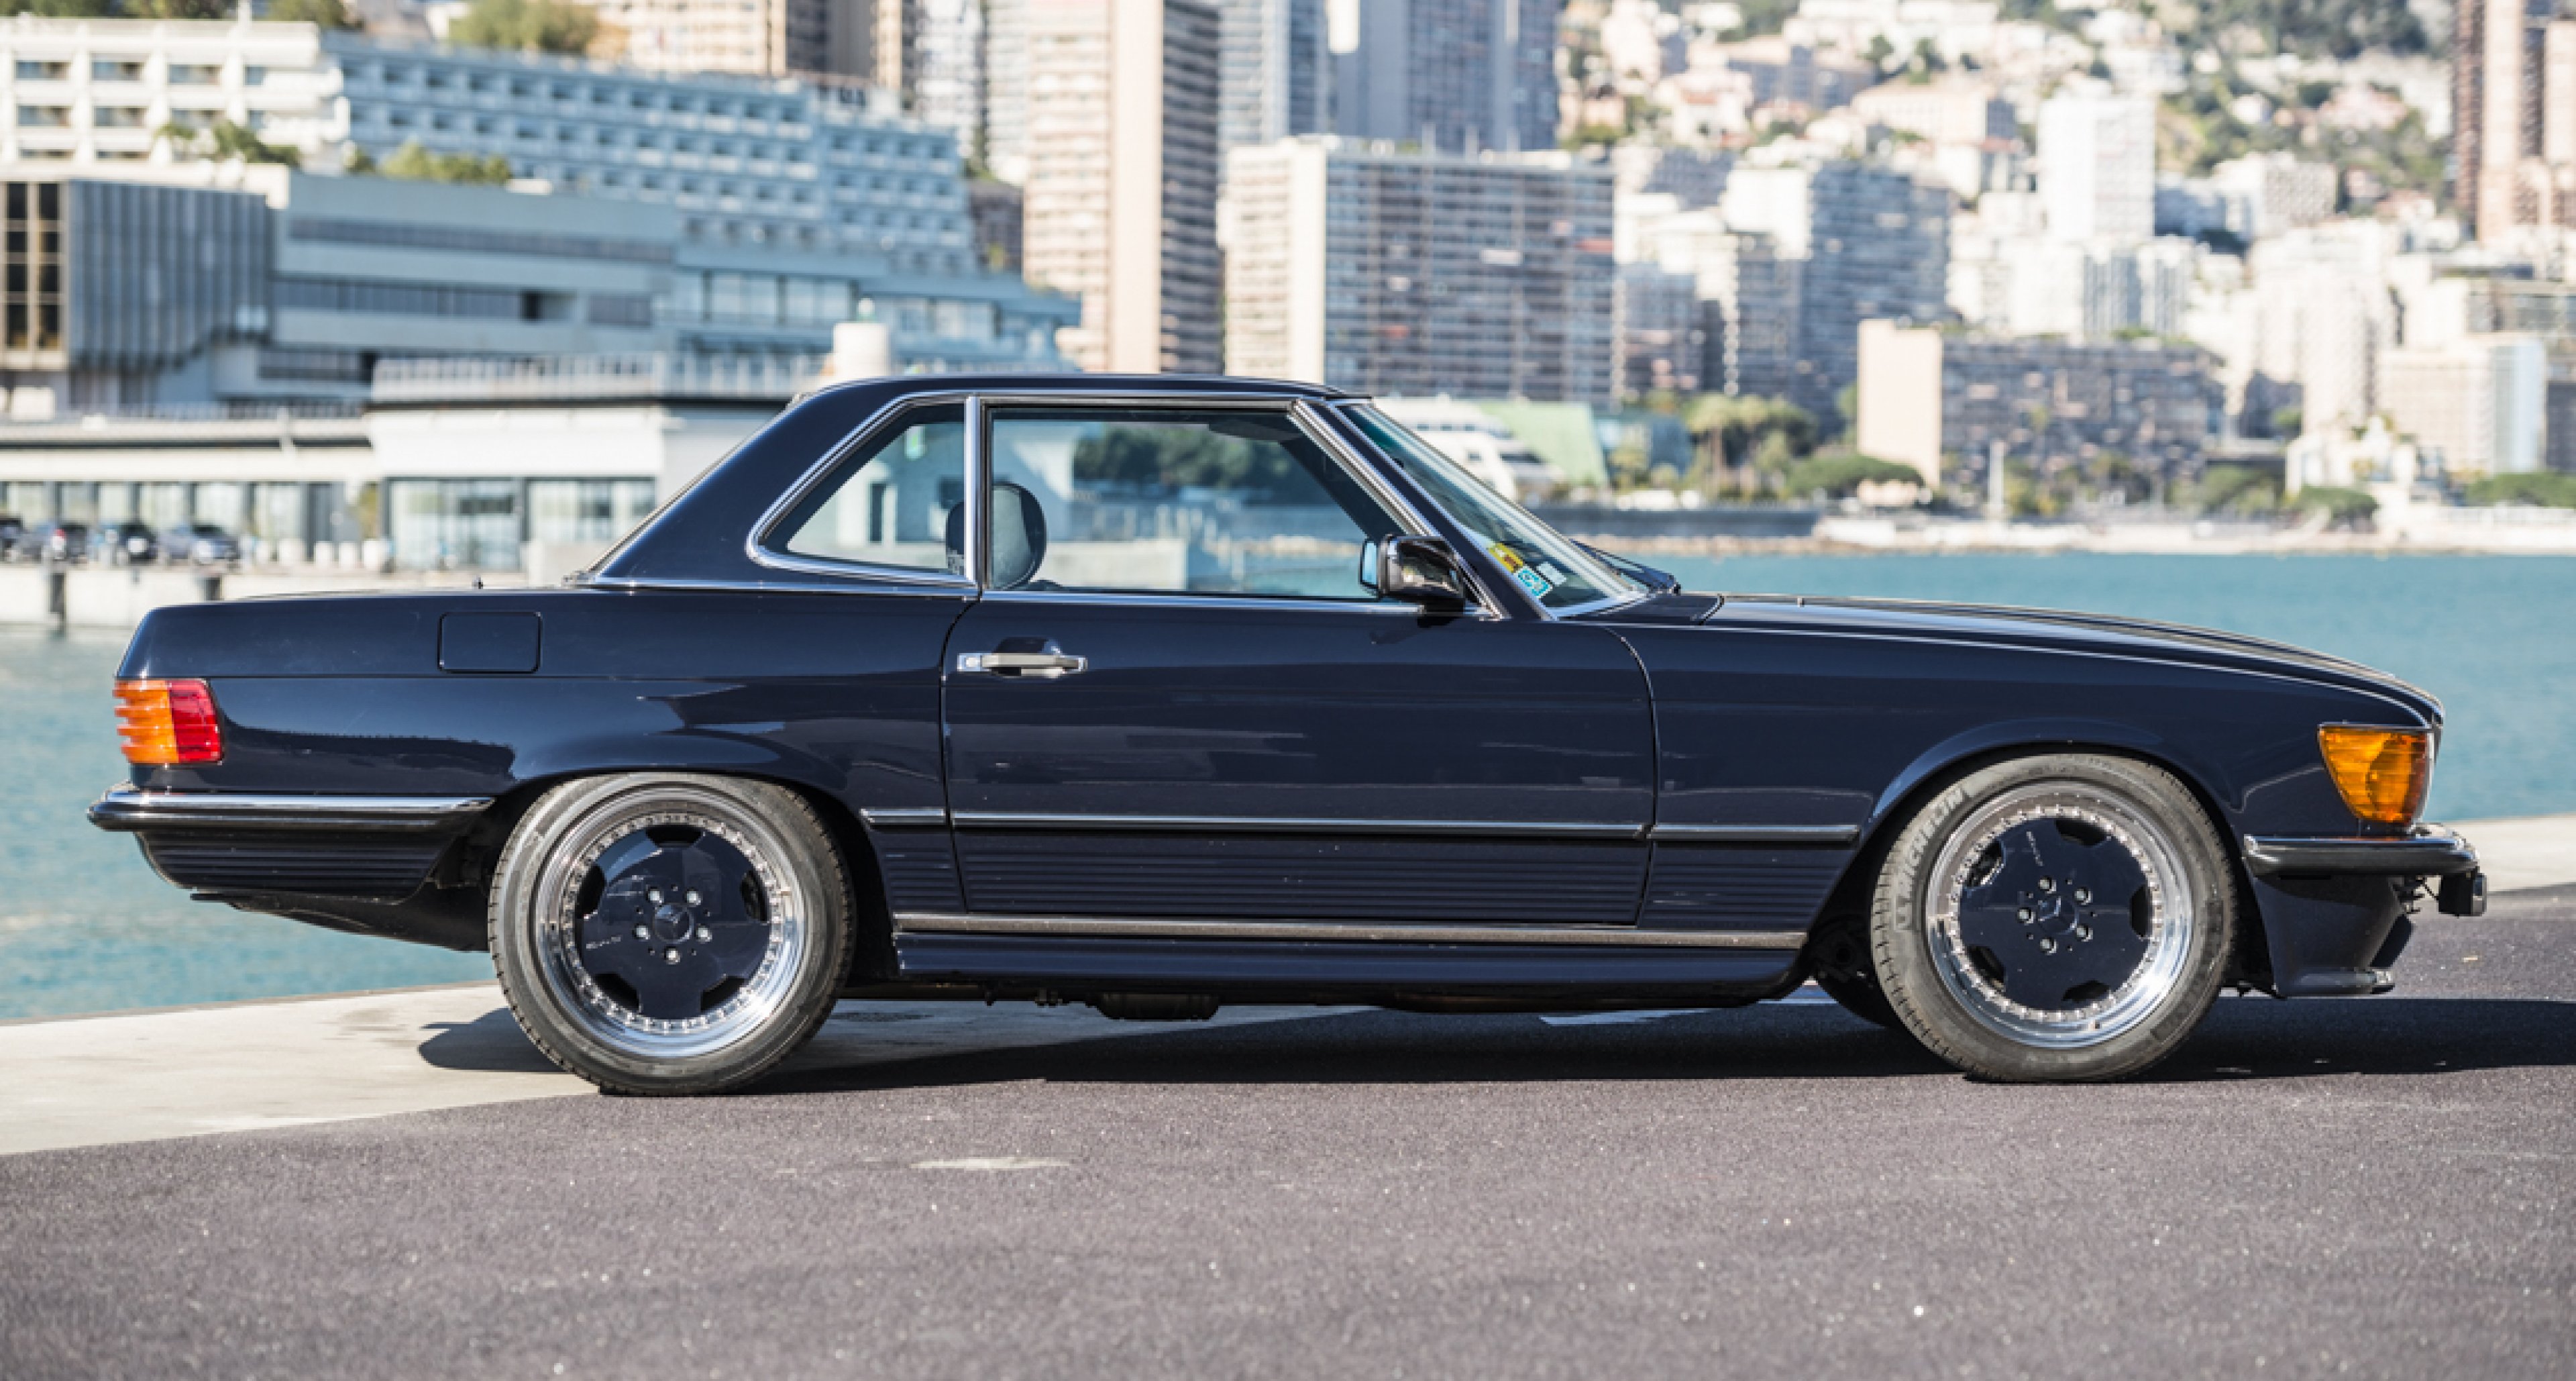 This Mercedes 560 Sl 6 0 Amg Hammered Away The Businessman S Blues Classic Driver Magazine